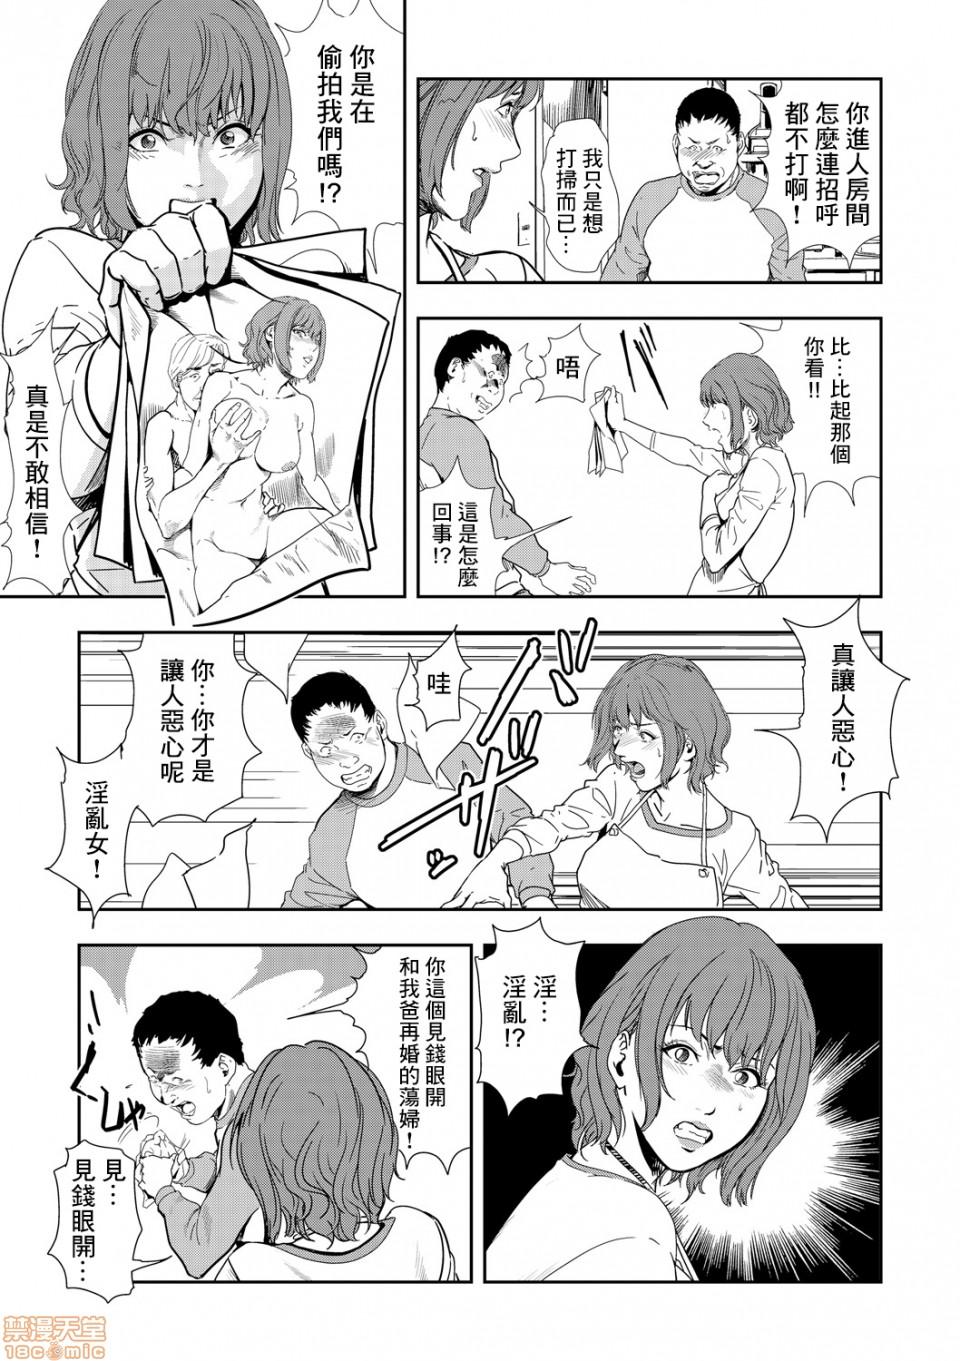 Public Chikan Express 7 Girls - Page 10